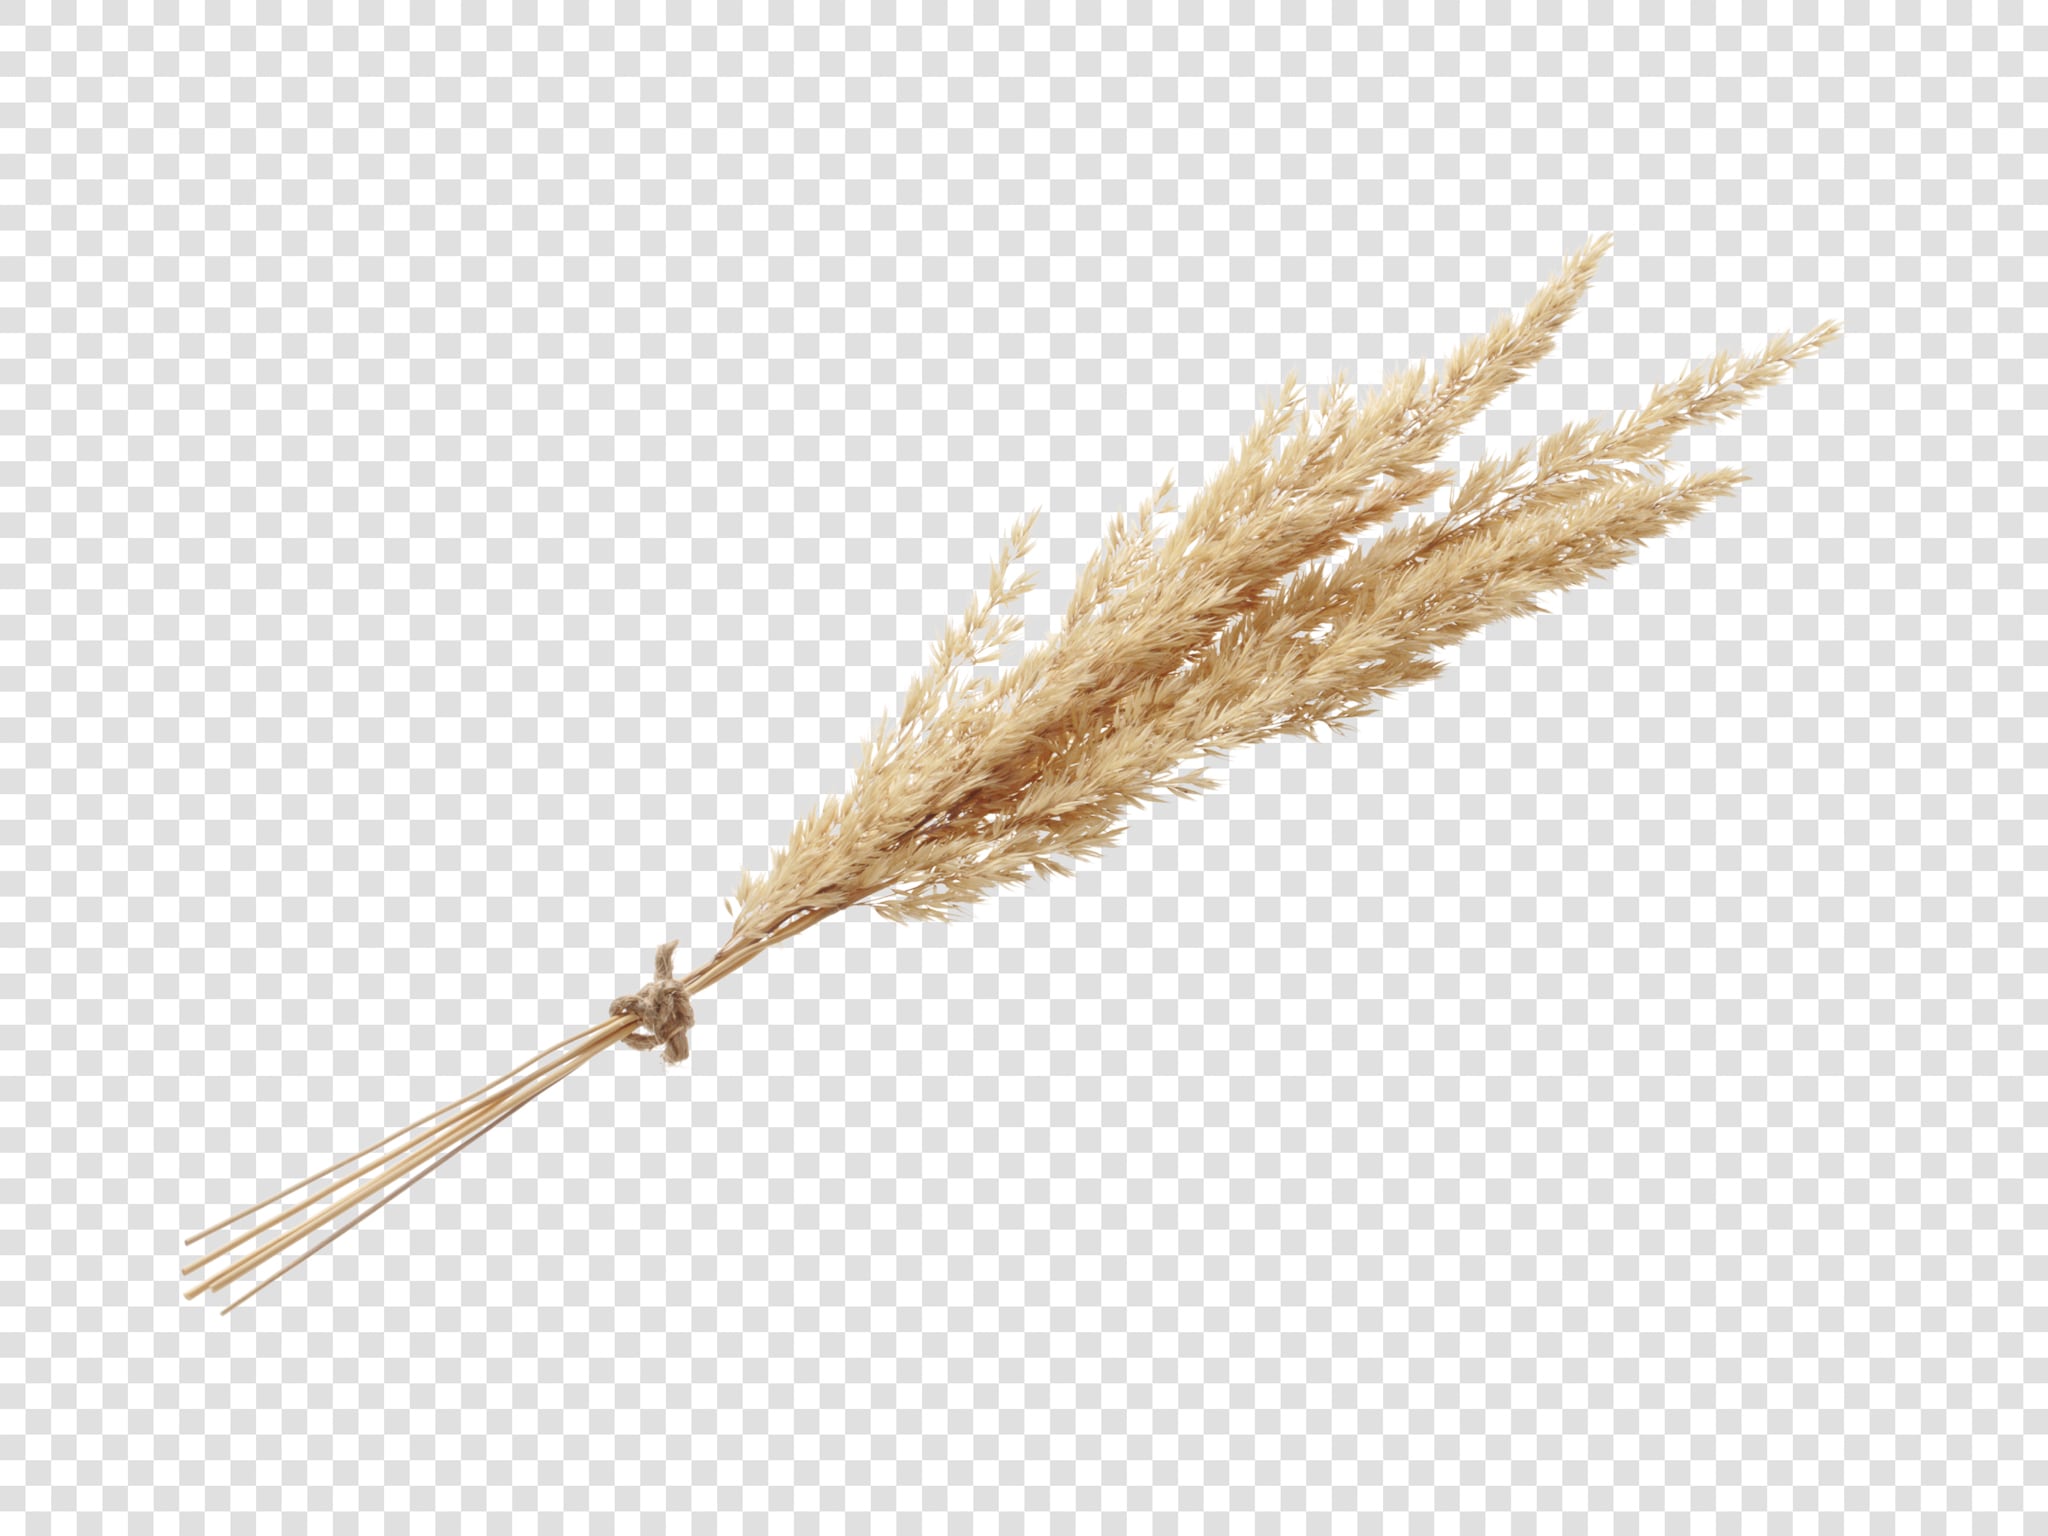 Dried flower image asset with transparent background